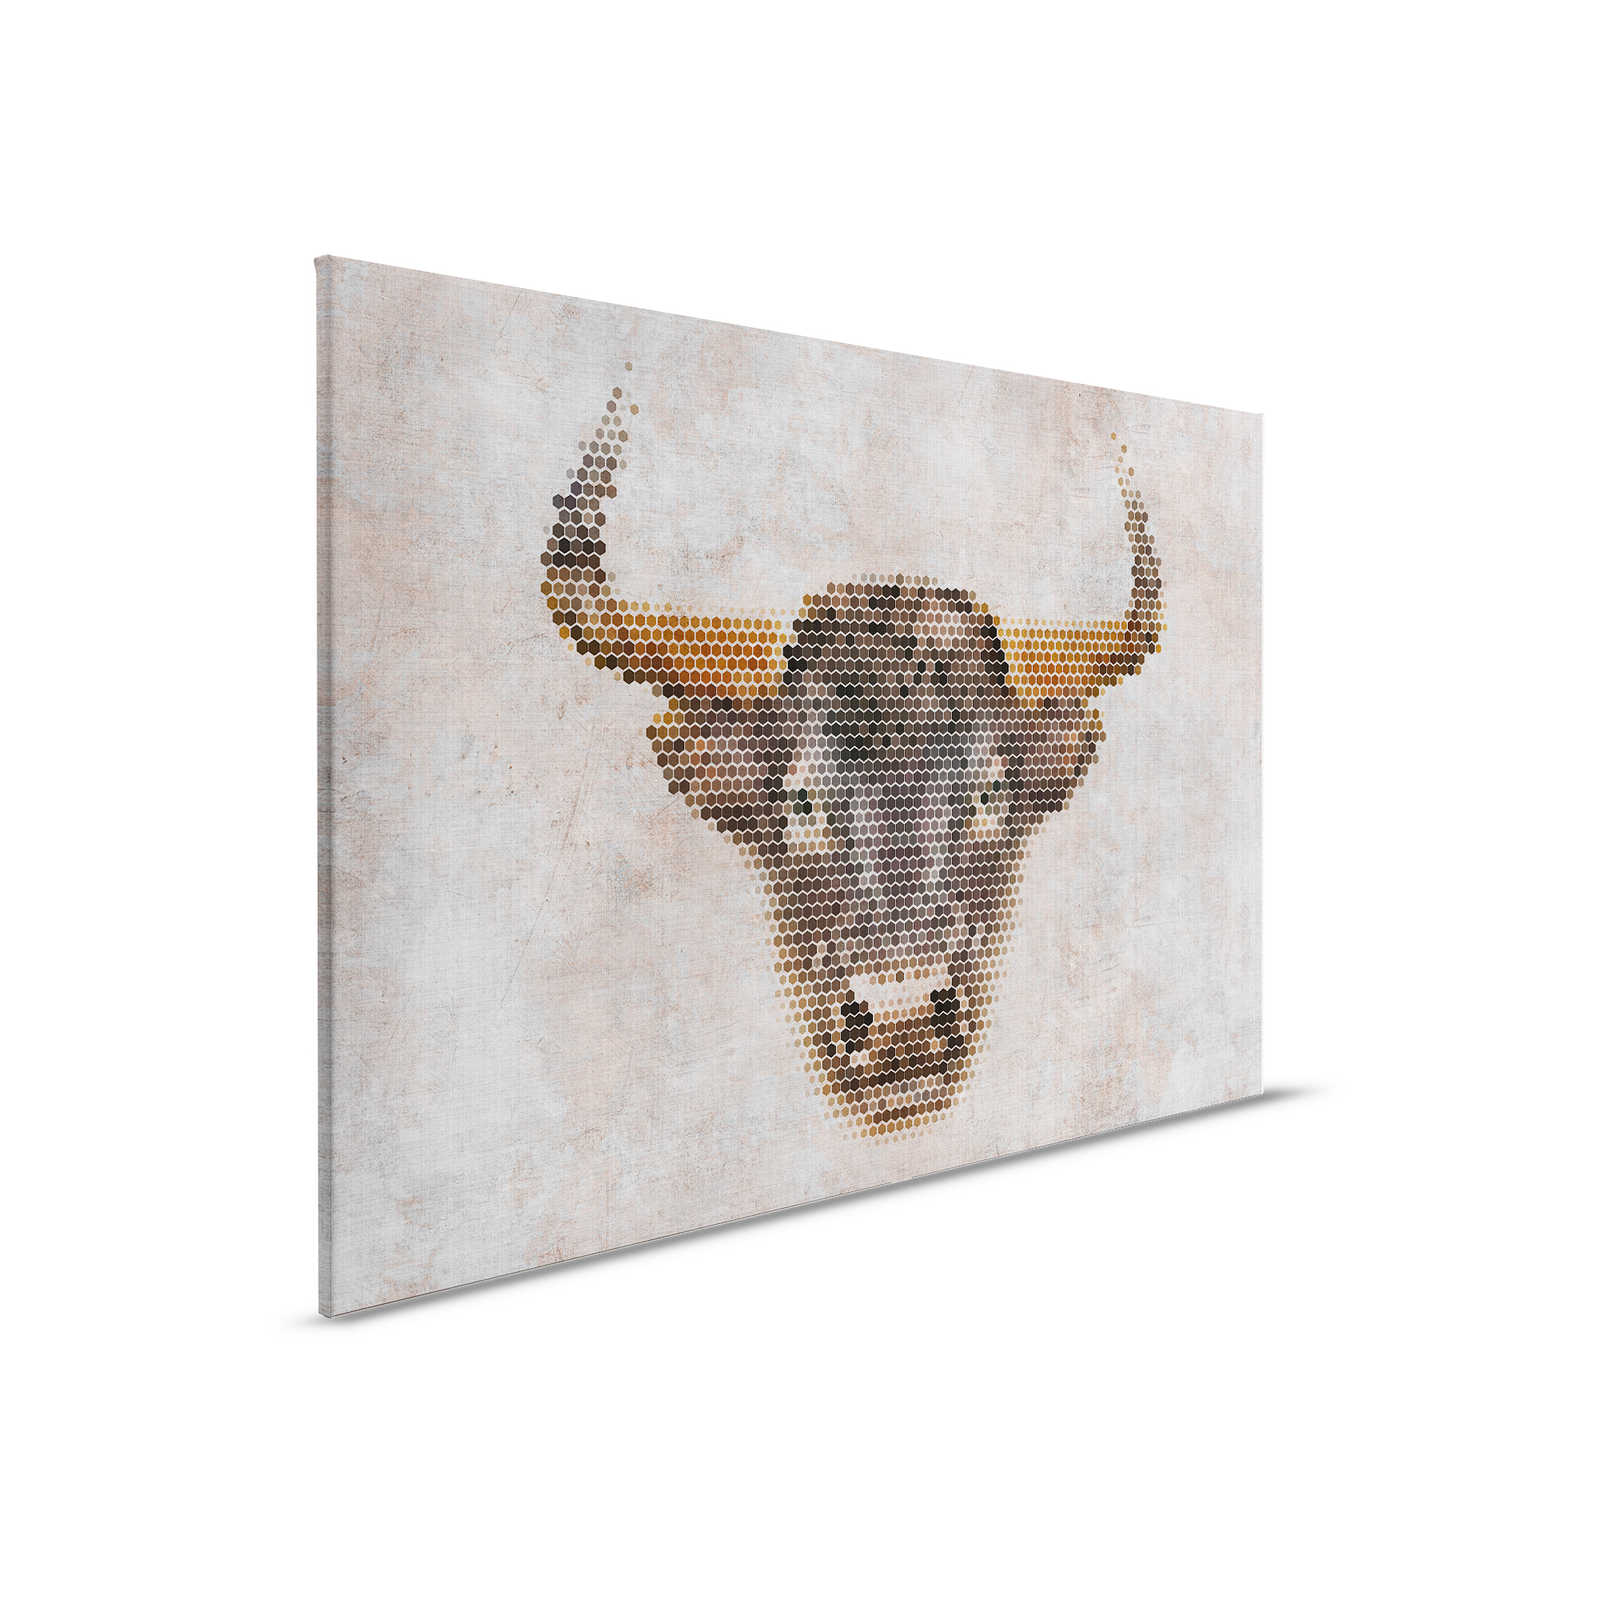         Big three 2 - Canvas painting, natural linen structure in concrete look with buffalo - 0.90 m x 0.60 m
    